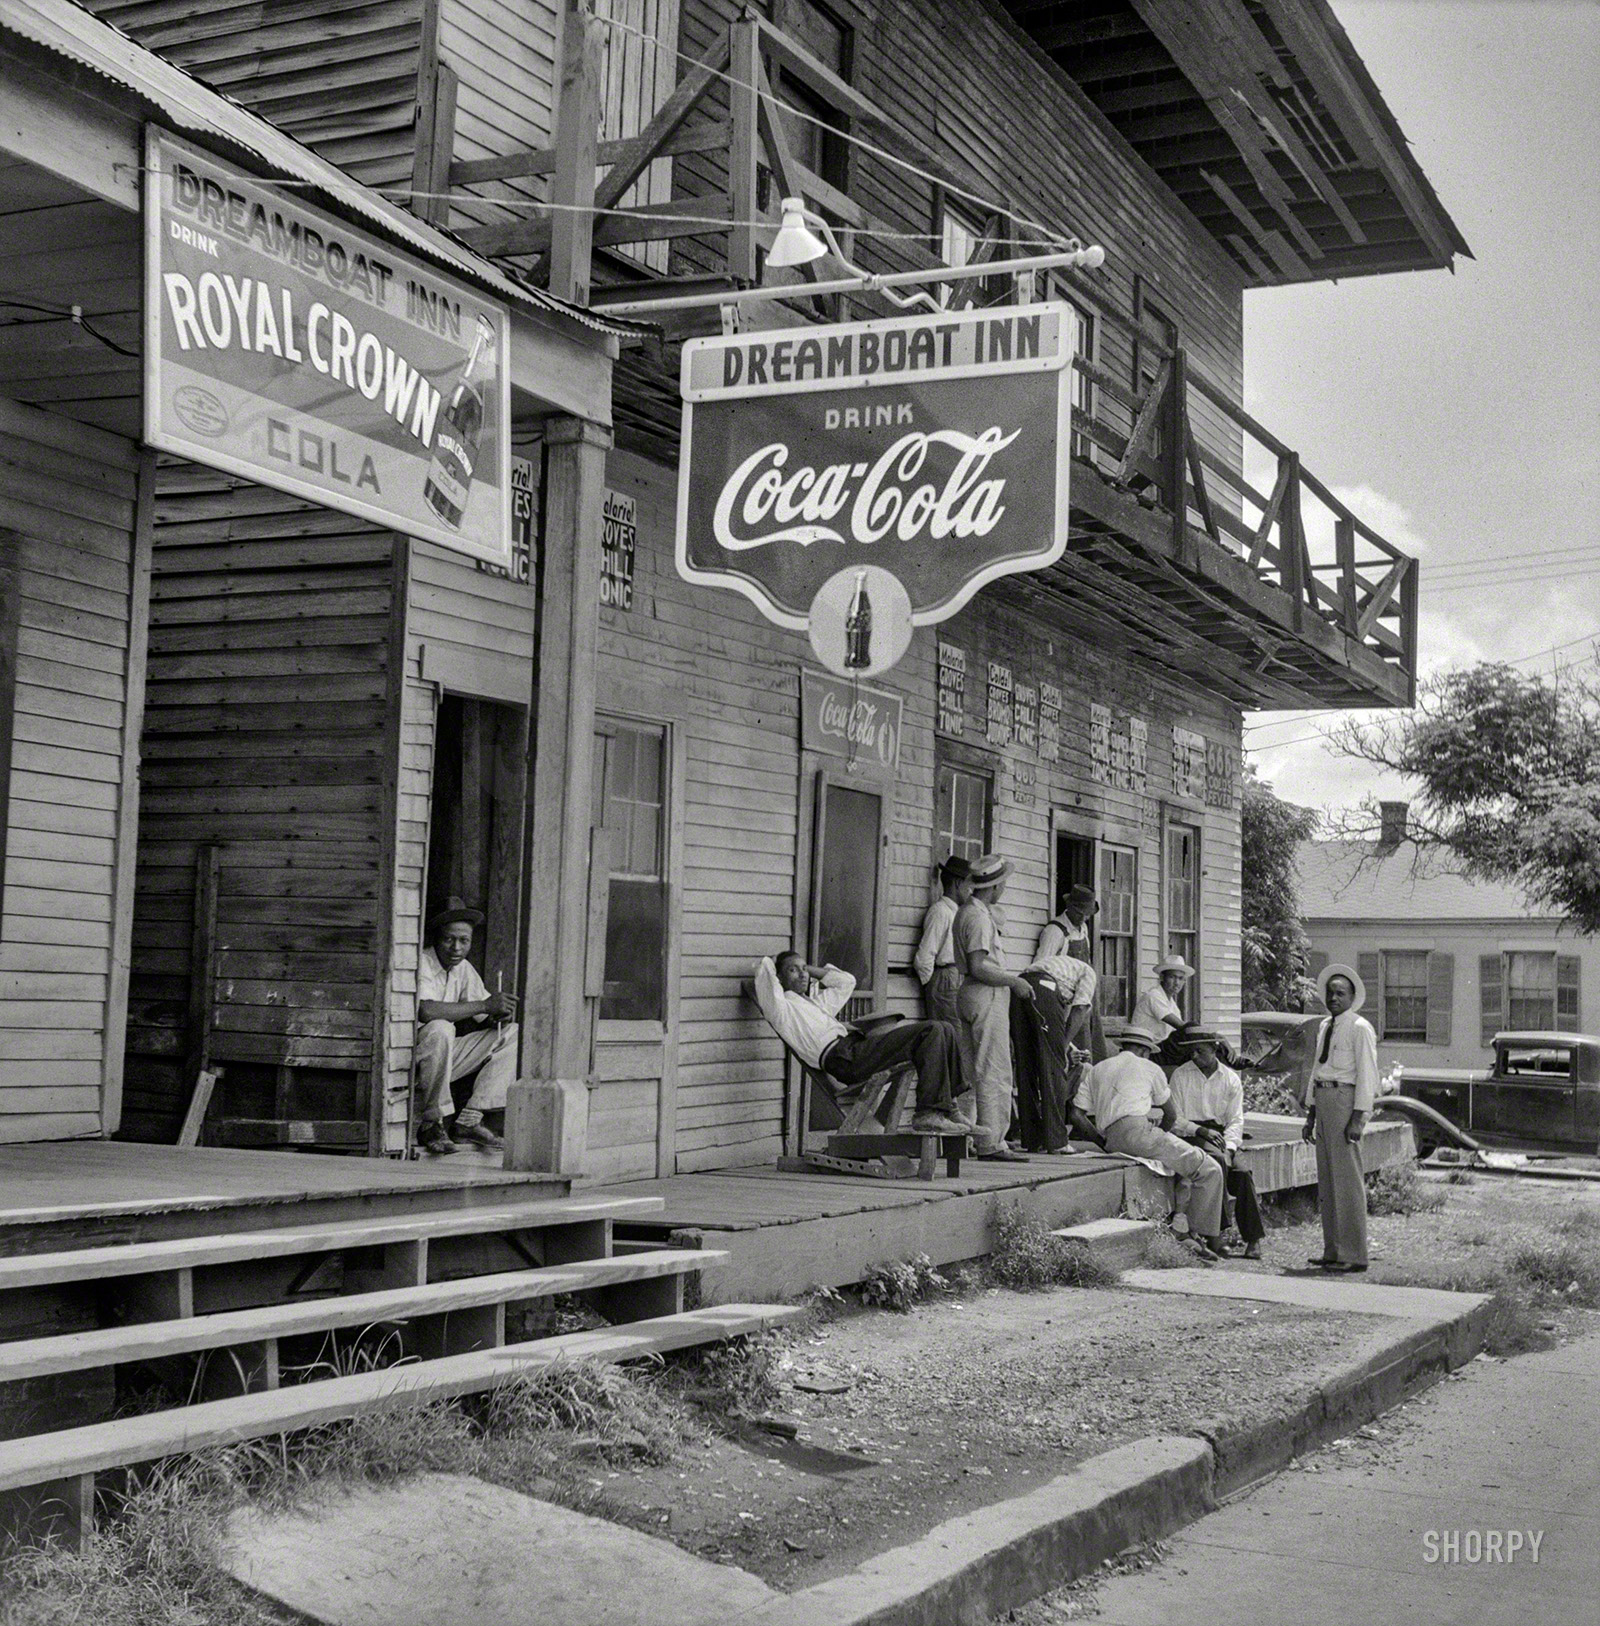 August 1940. "Port Gibson, Mississippi." The Dreamboat Inn, whose signage advertises anti-malarial tonics and two kinds of cola. Medium format negative by Marion Post Wolcott for the Resettlement Administration. View full size.